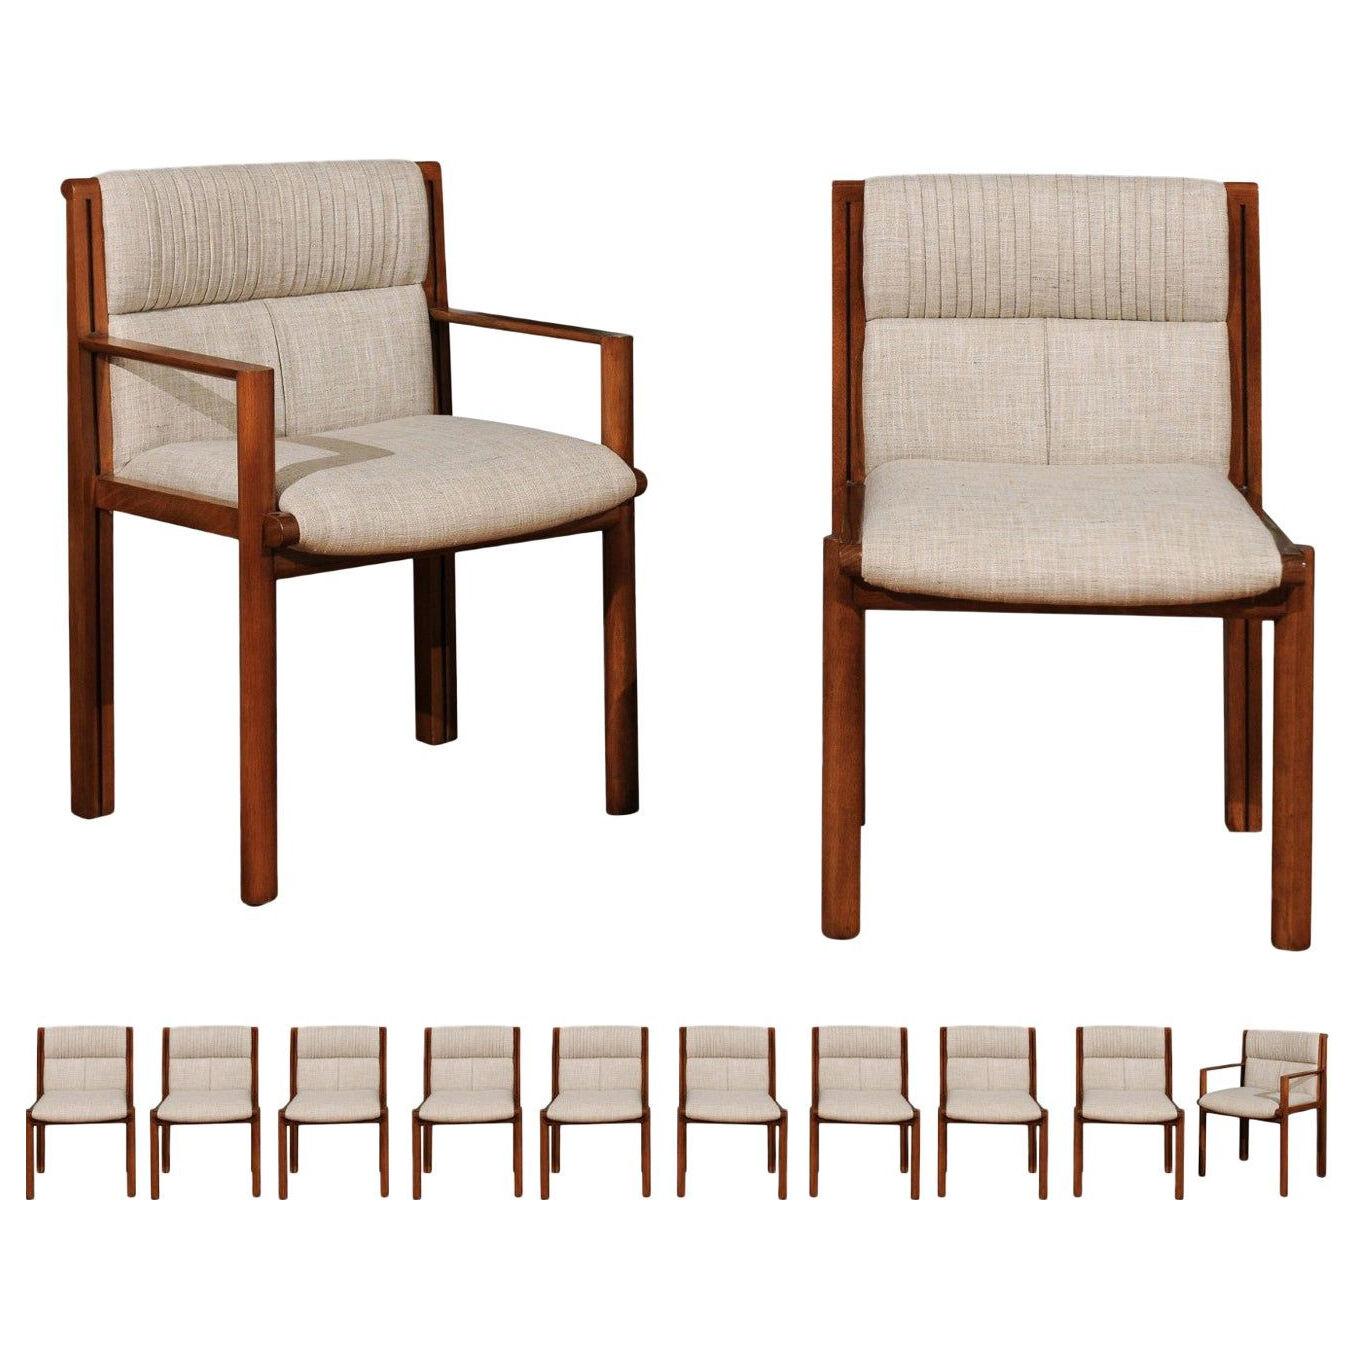 Sublime Restored Set of 12 Dining Chairs by John Saladino for Baker, circa 1985